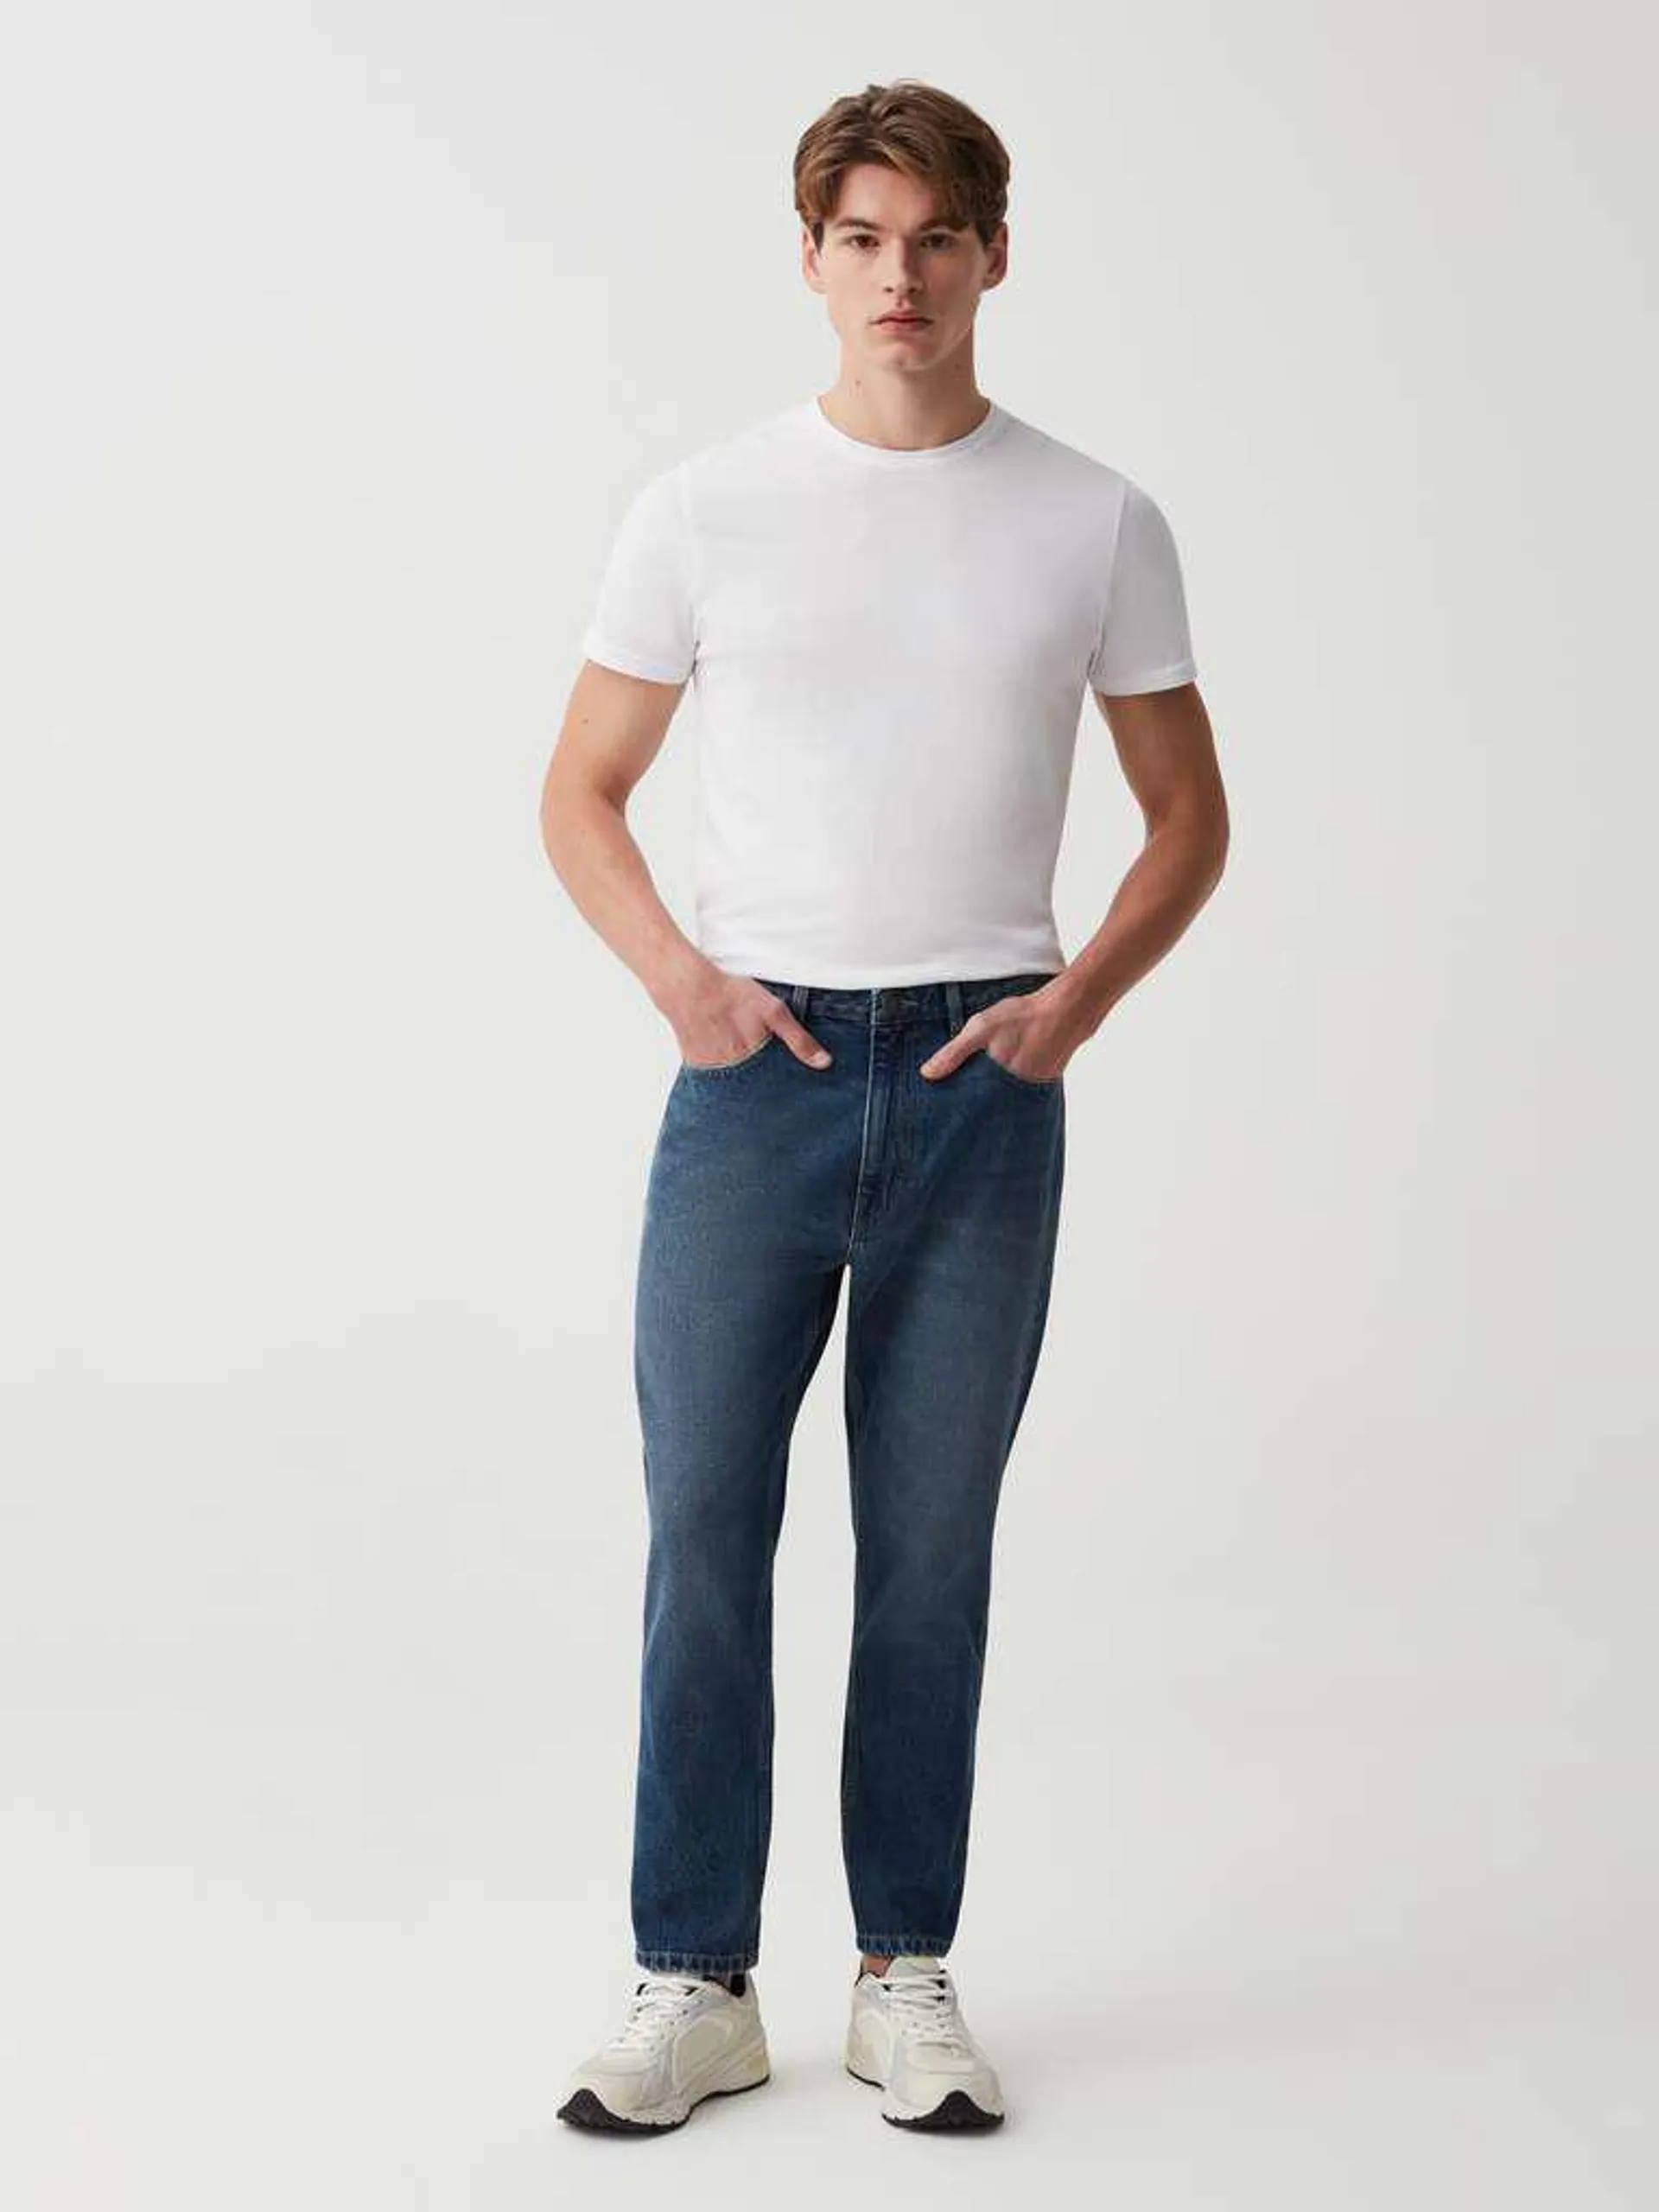 Medium Wash Carrot-fit jeans with fading